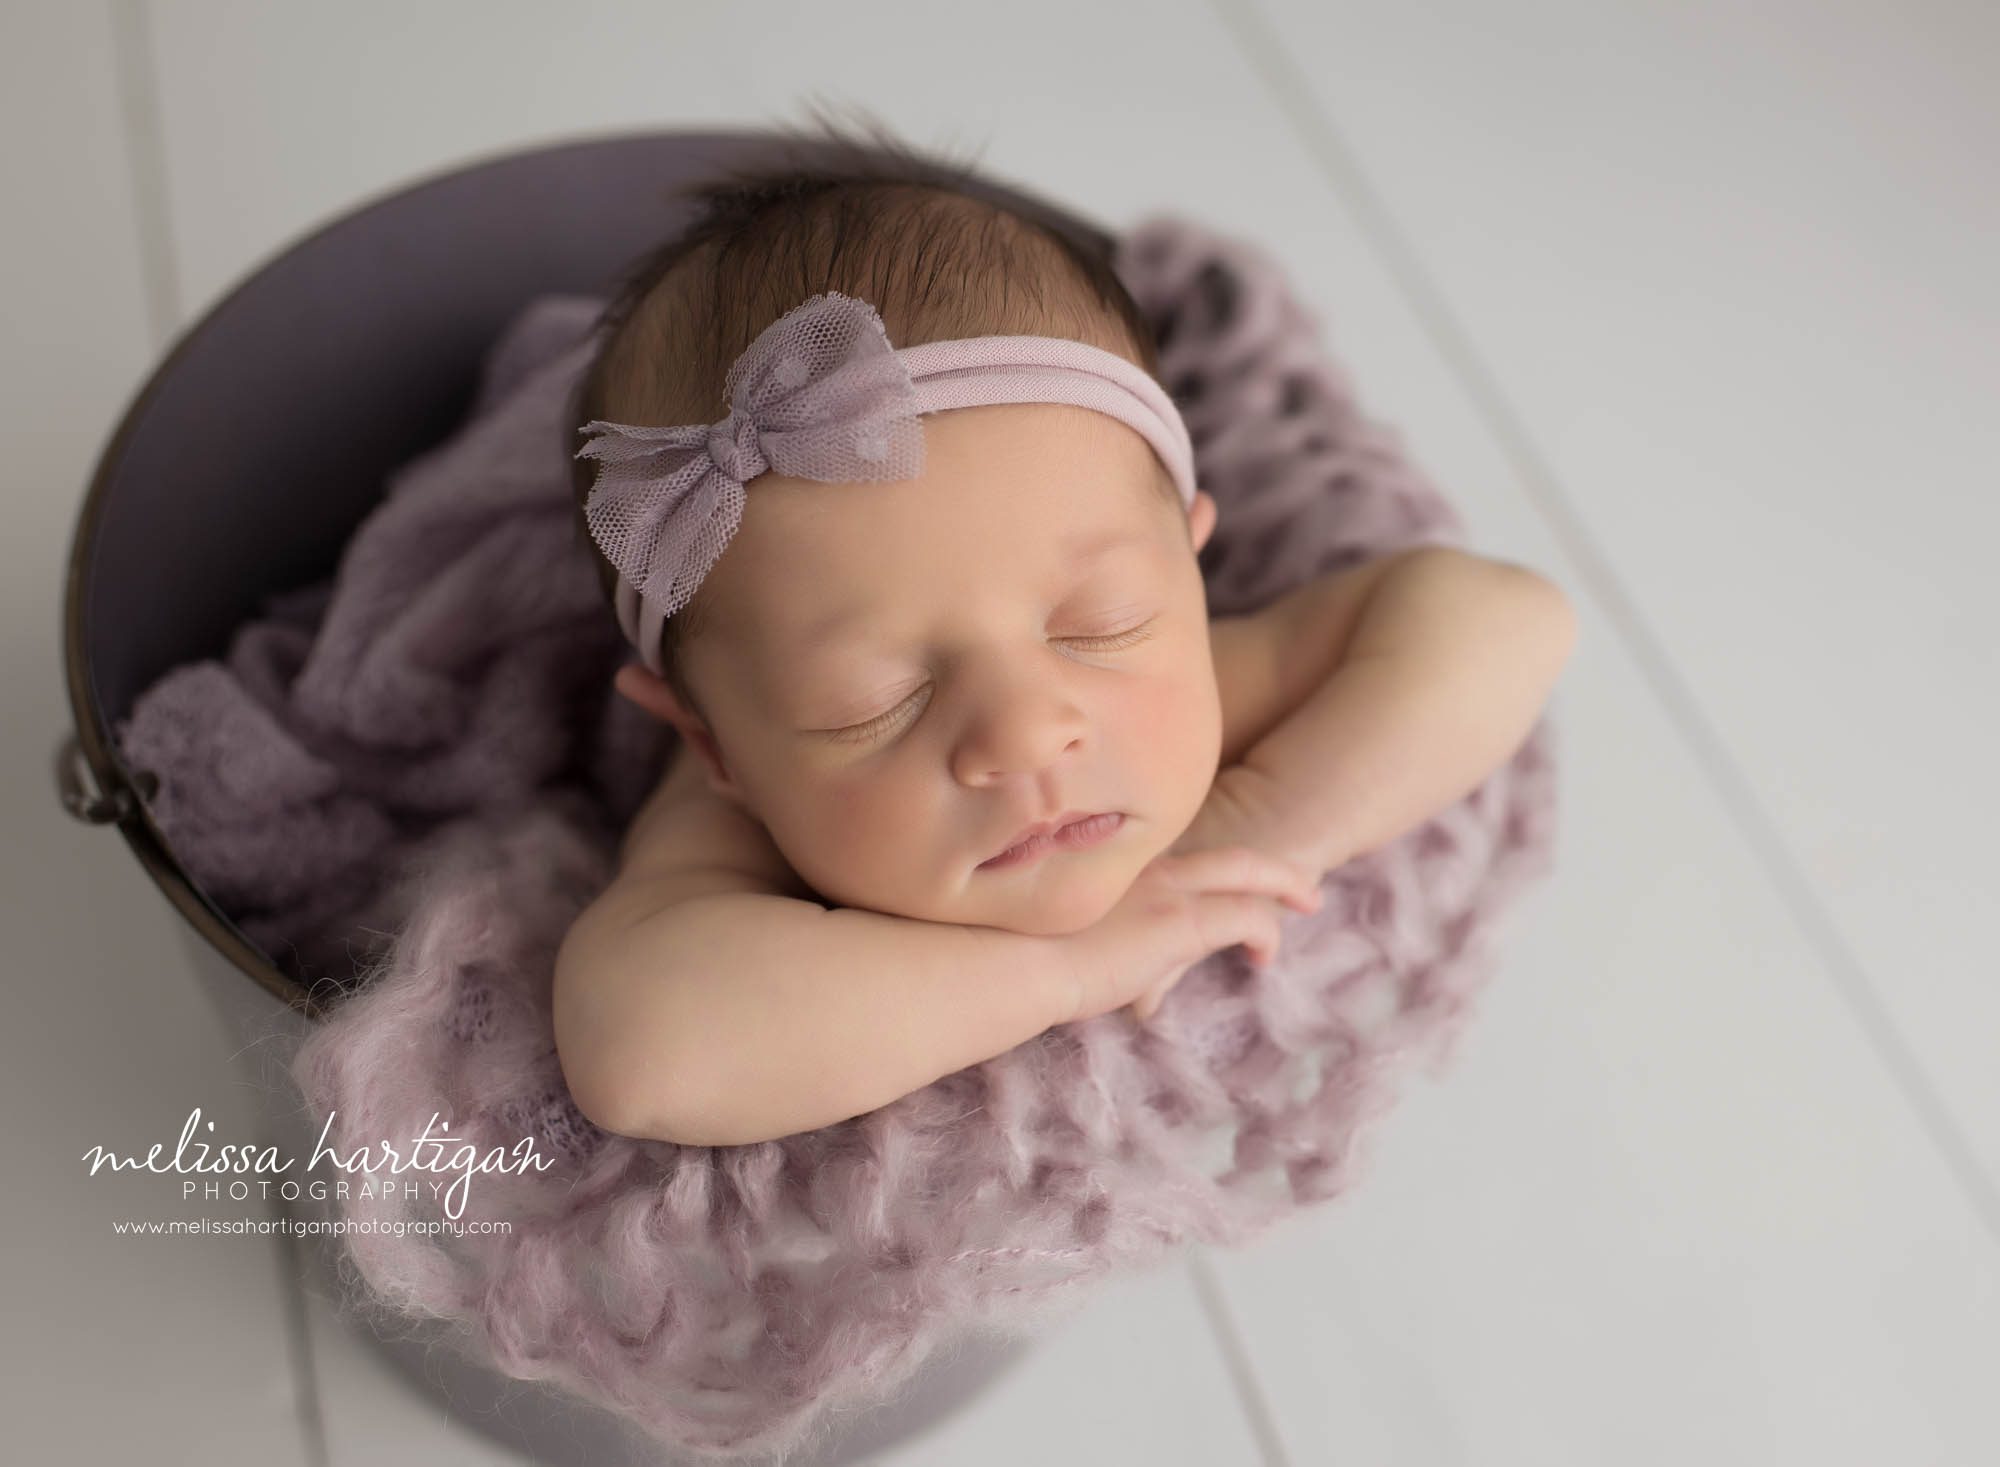 newborn baby girl posed in bucket with chin rested on her hands